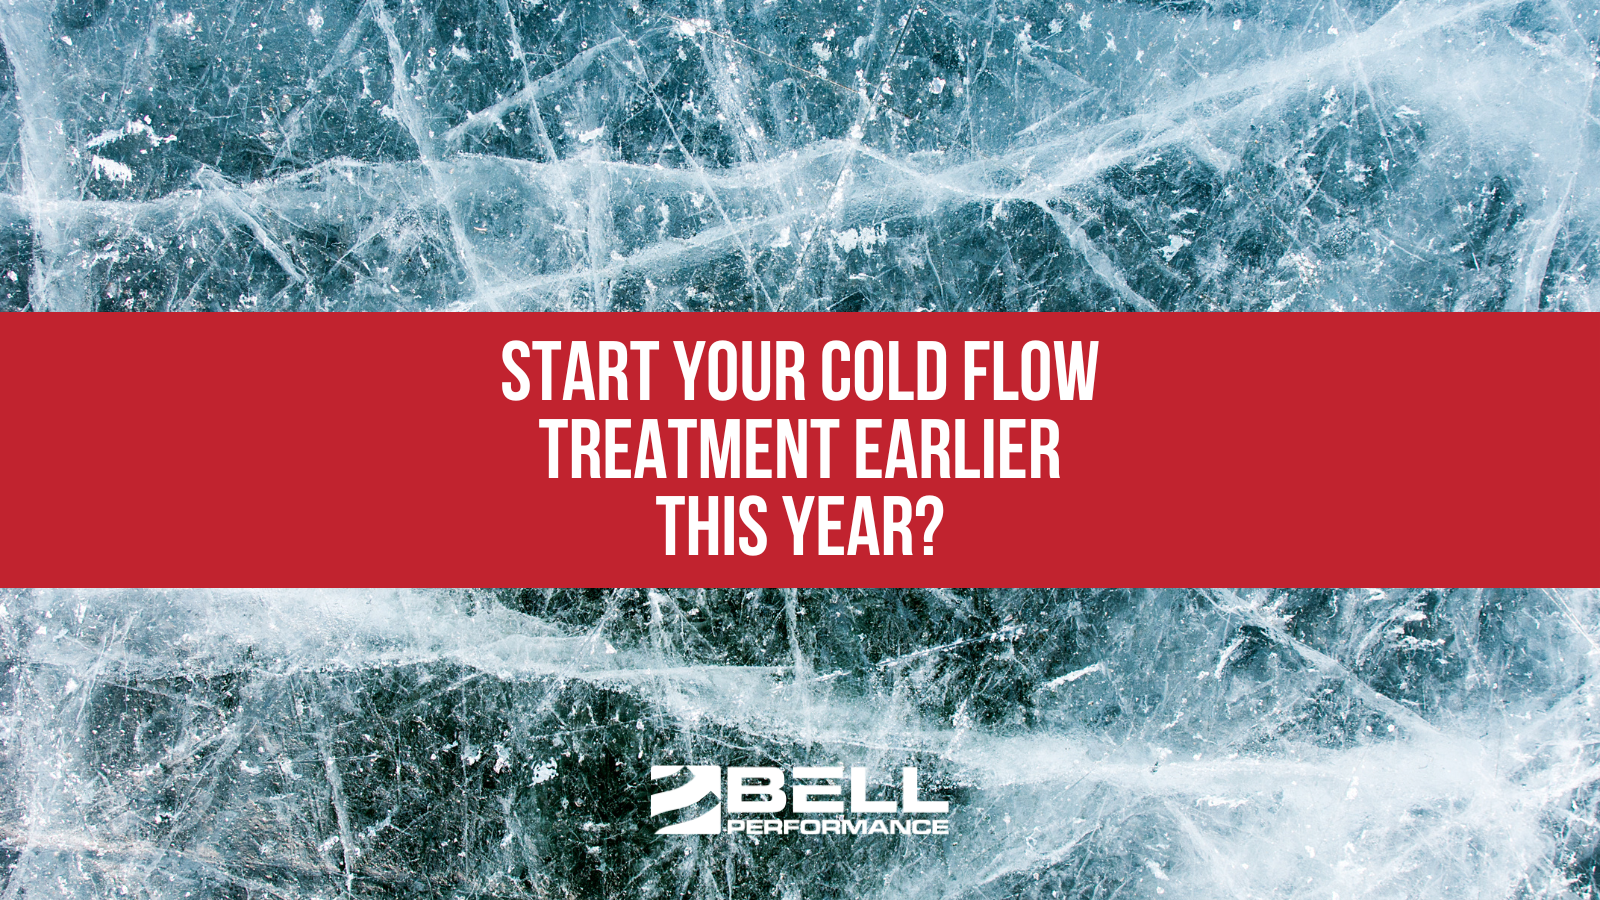 Start Your Cold Flow Treatment Earlier This Year?